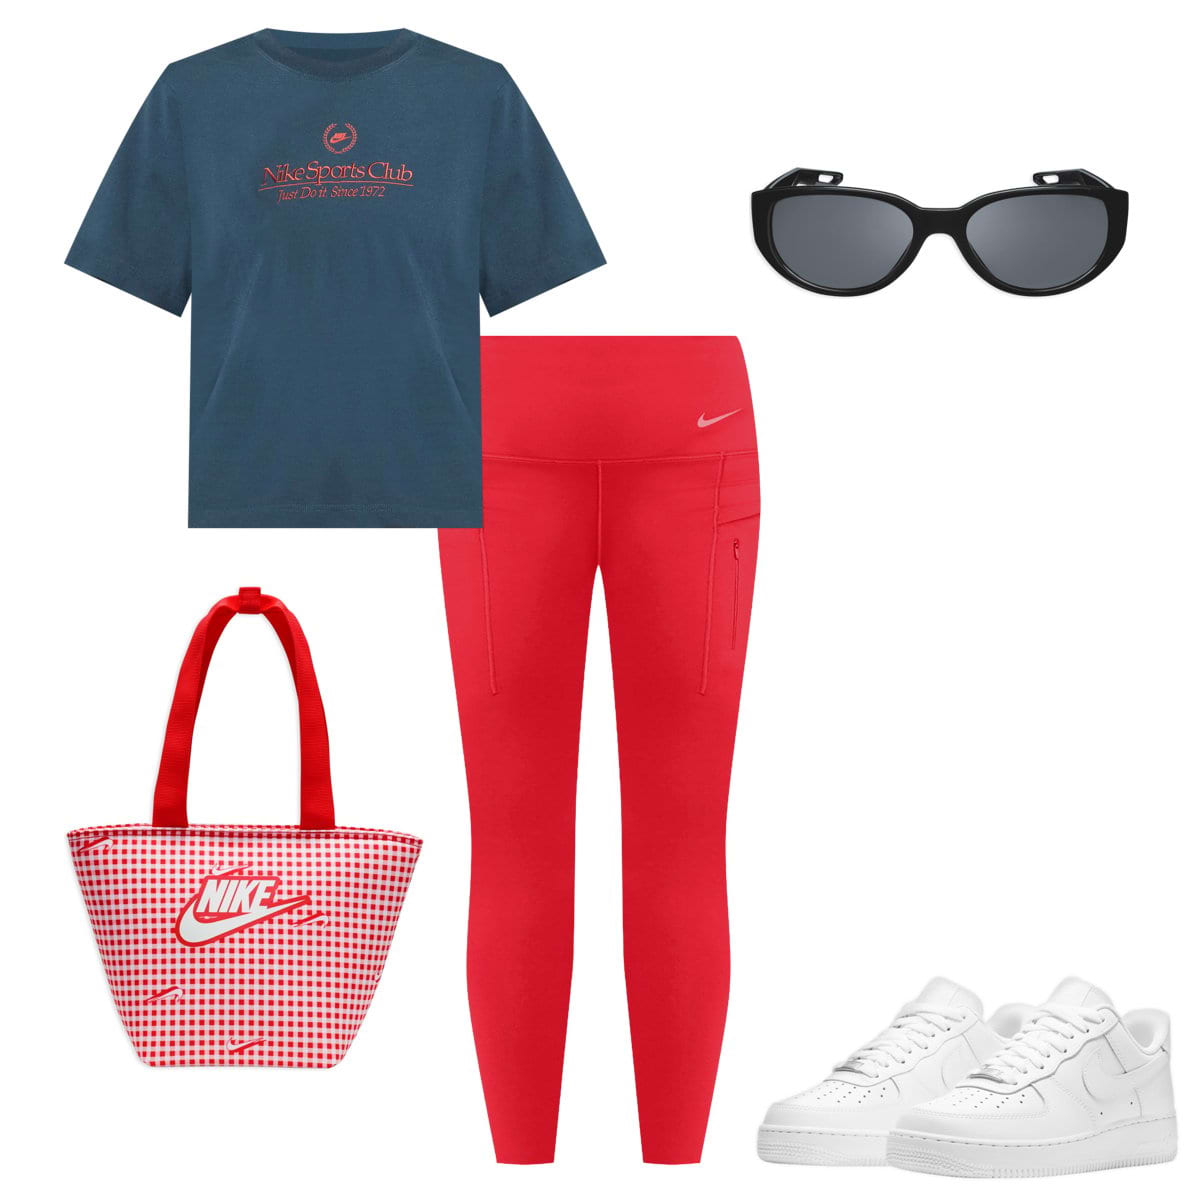 Leggings, tshirt and nikes comfy travel outfit